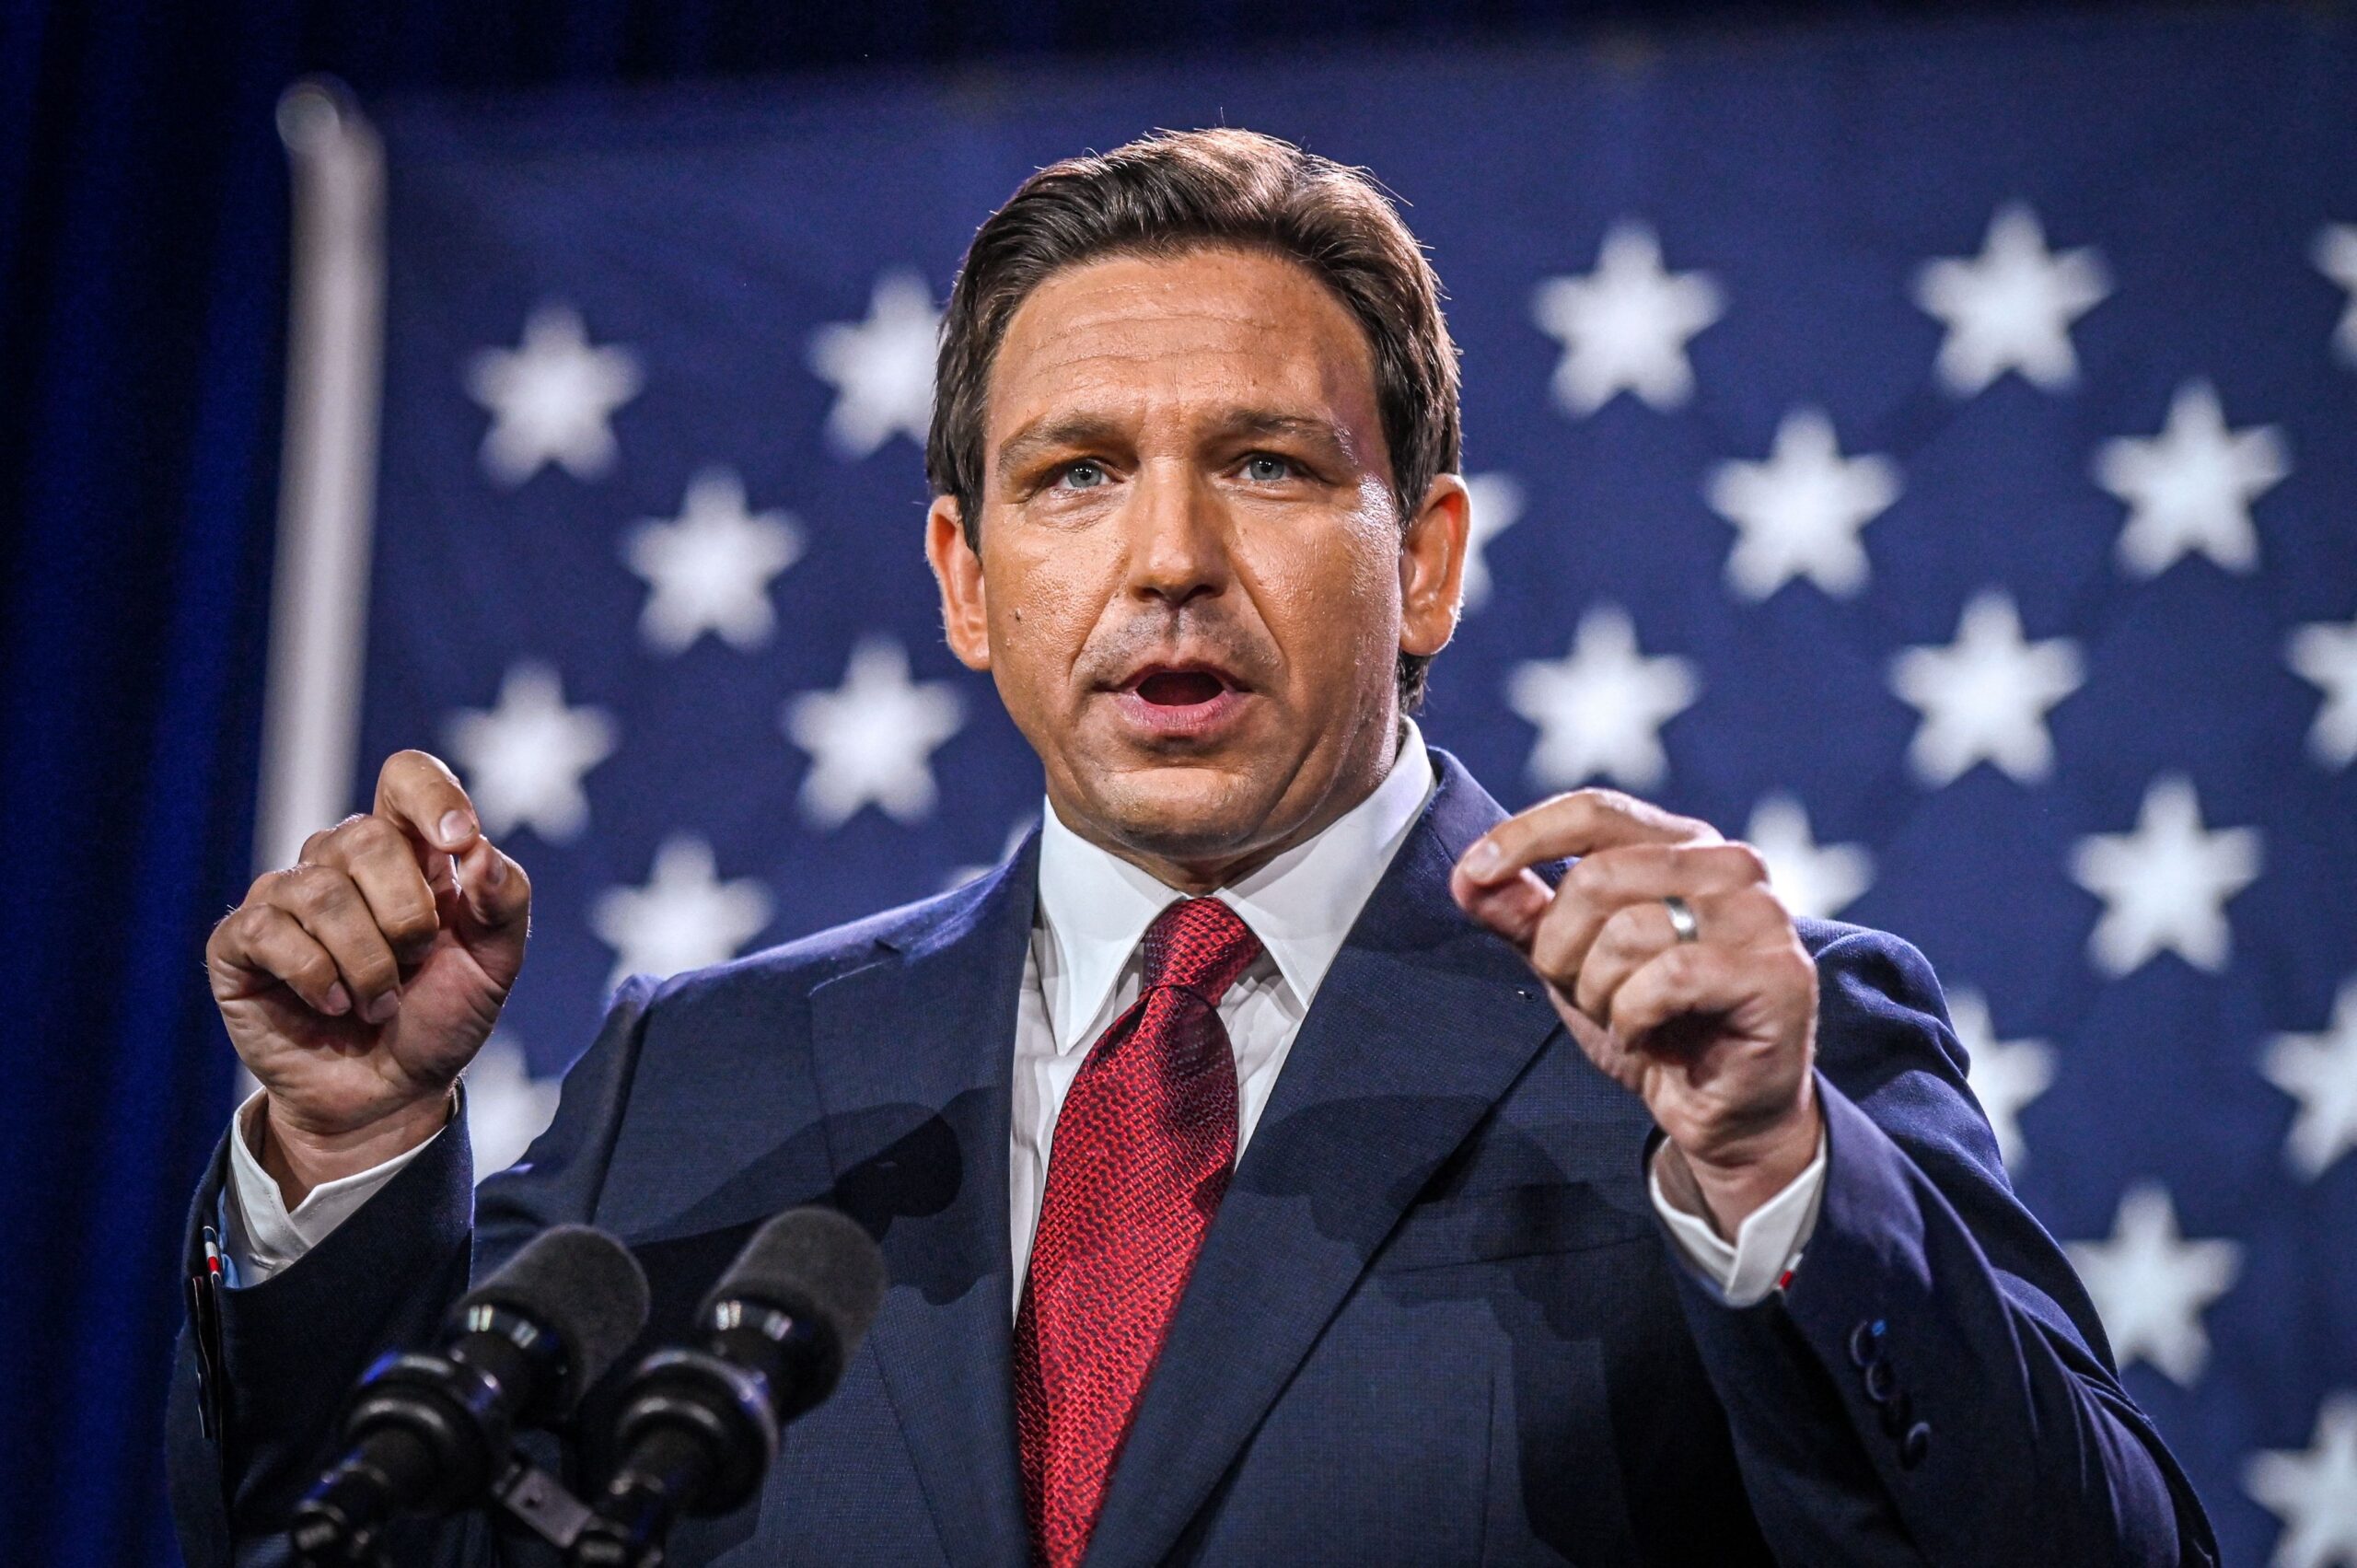 DeSantis Blasts Trump’s ‘Bizarre’ Attacks During Shapiro Interview: ‘He’s Been Attacking Me By Moving Left’